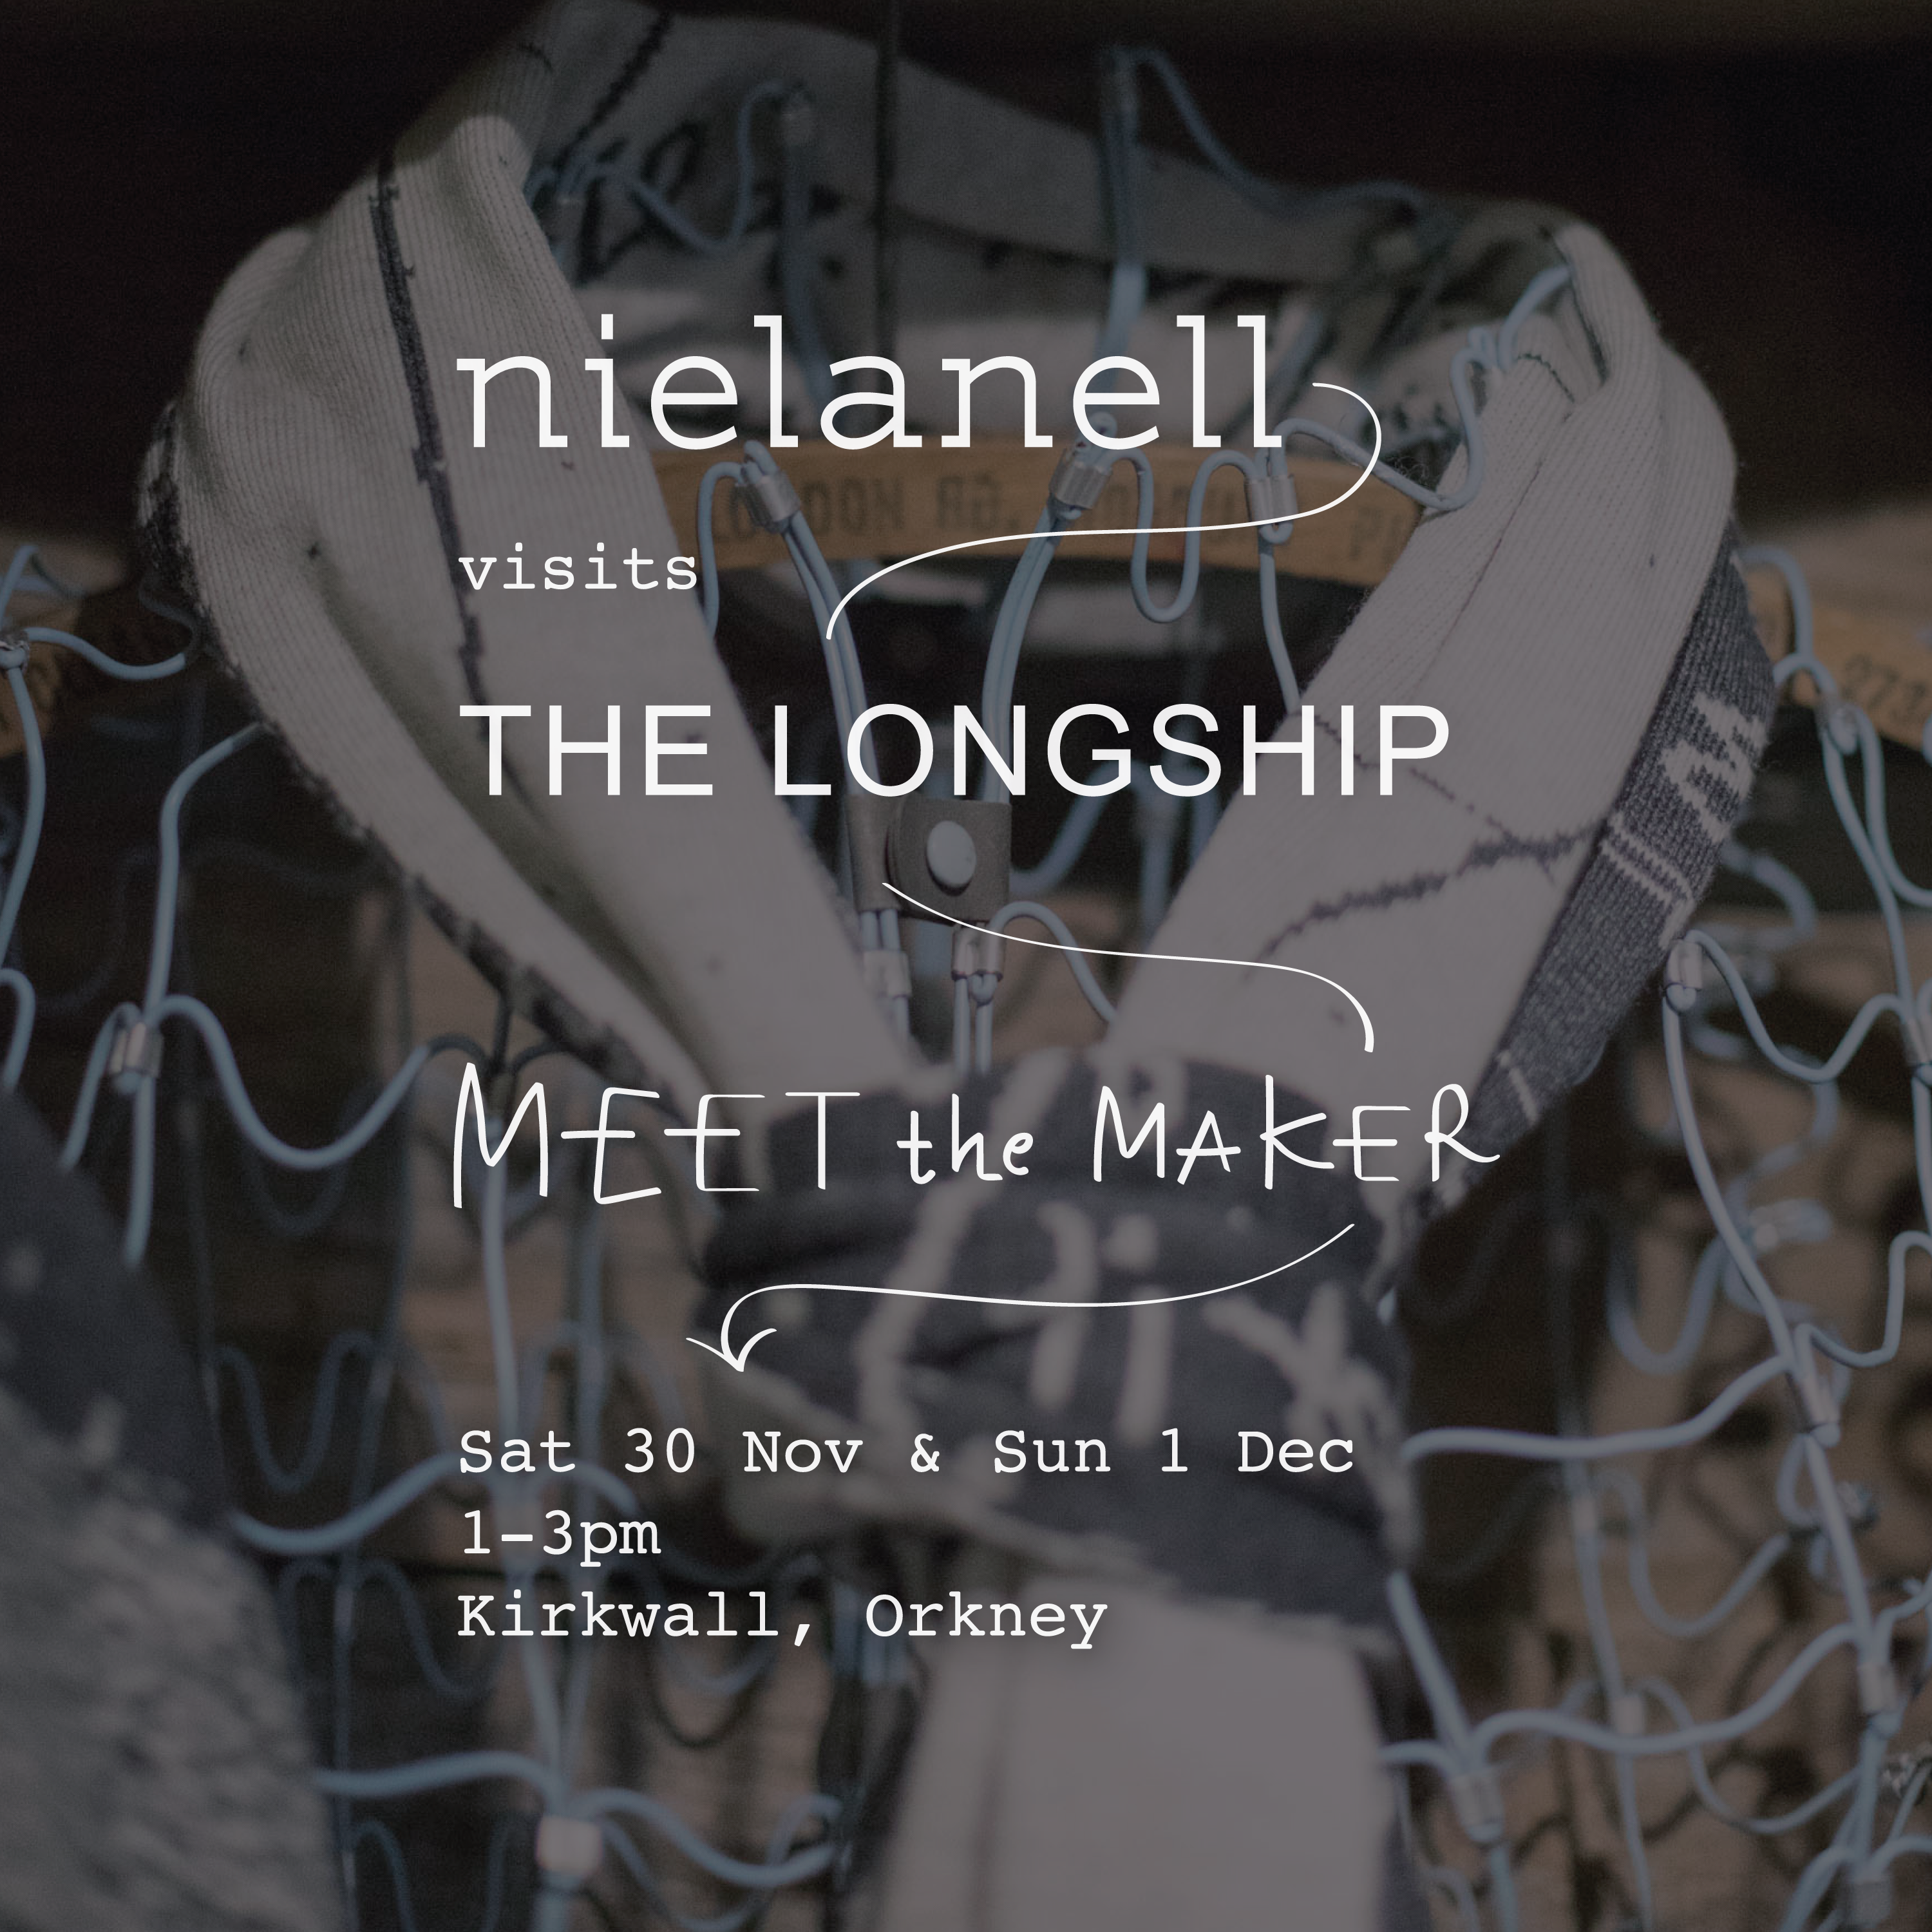 Nielanell meet the maker at The Longship, Kirkwall, Orkney. Graphic with image of Nielanell knitwear on wire mannequin